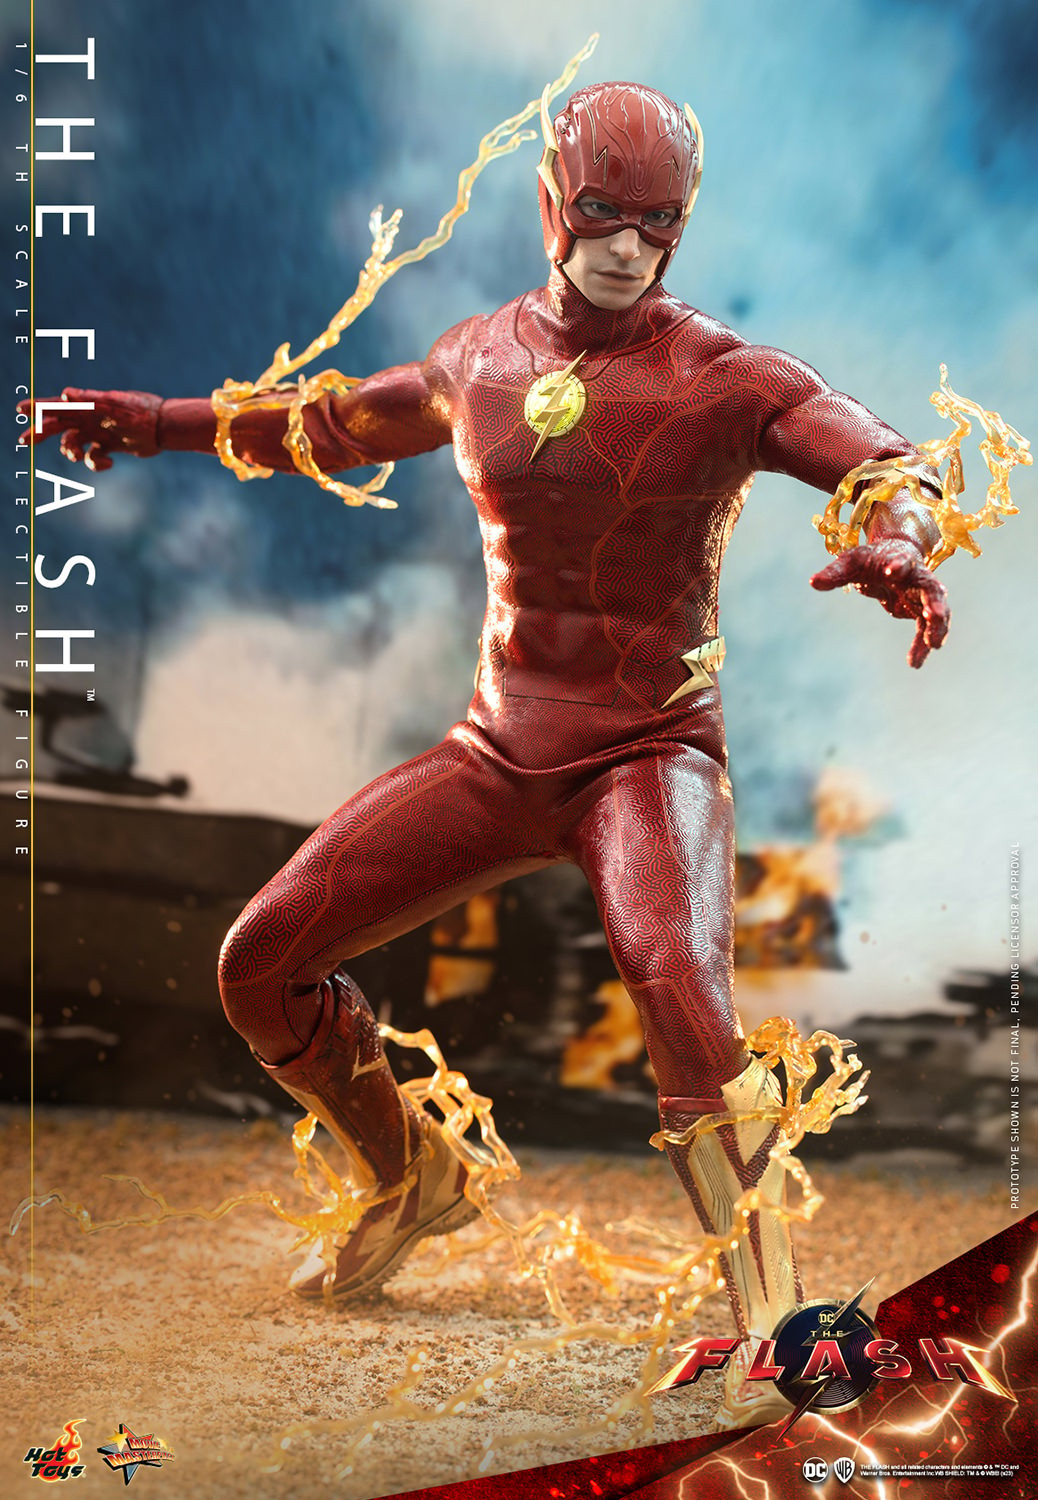 The Flash (Special Edition) (Prototype Shown) View 11